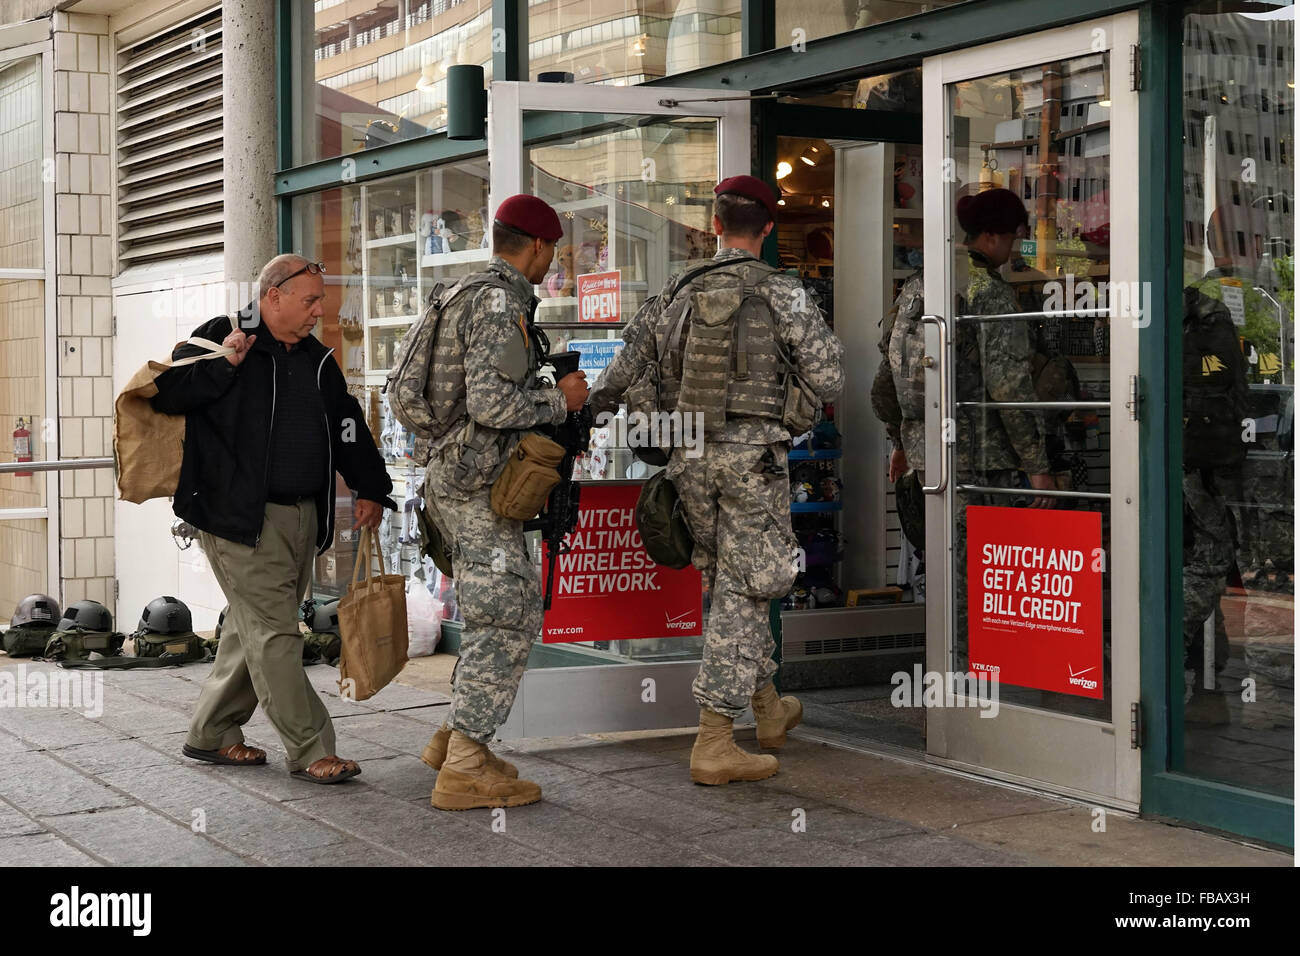 A man follows heavily armed National Guard troopers on patrol into a shop in Baltimores inner harbor, April 30, 2015. Stock Photo